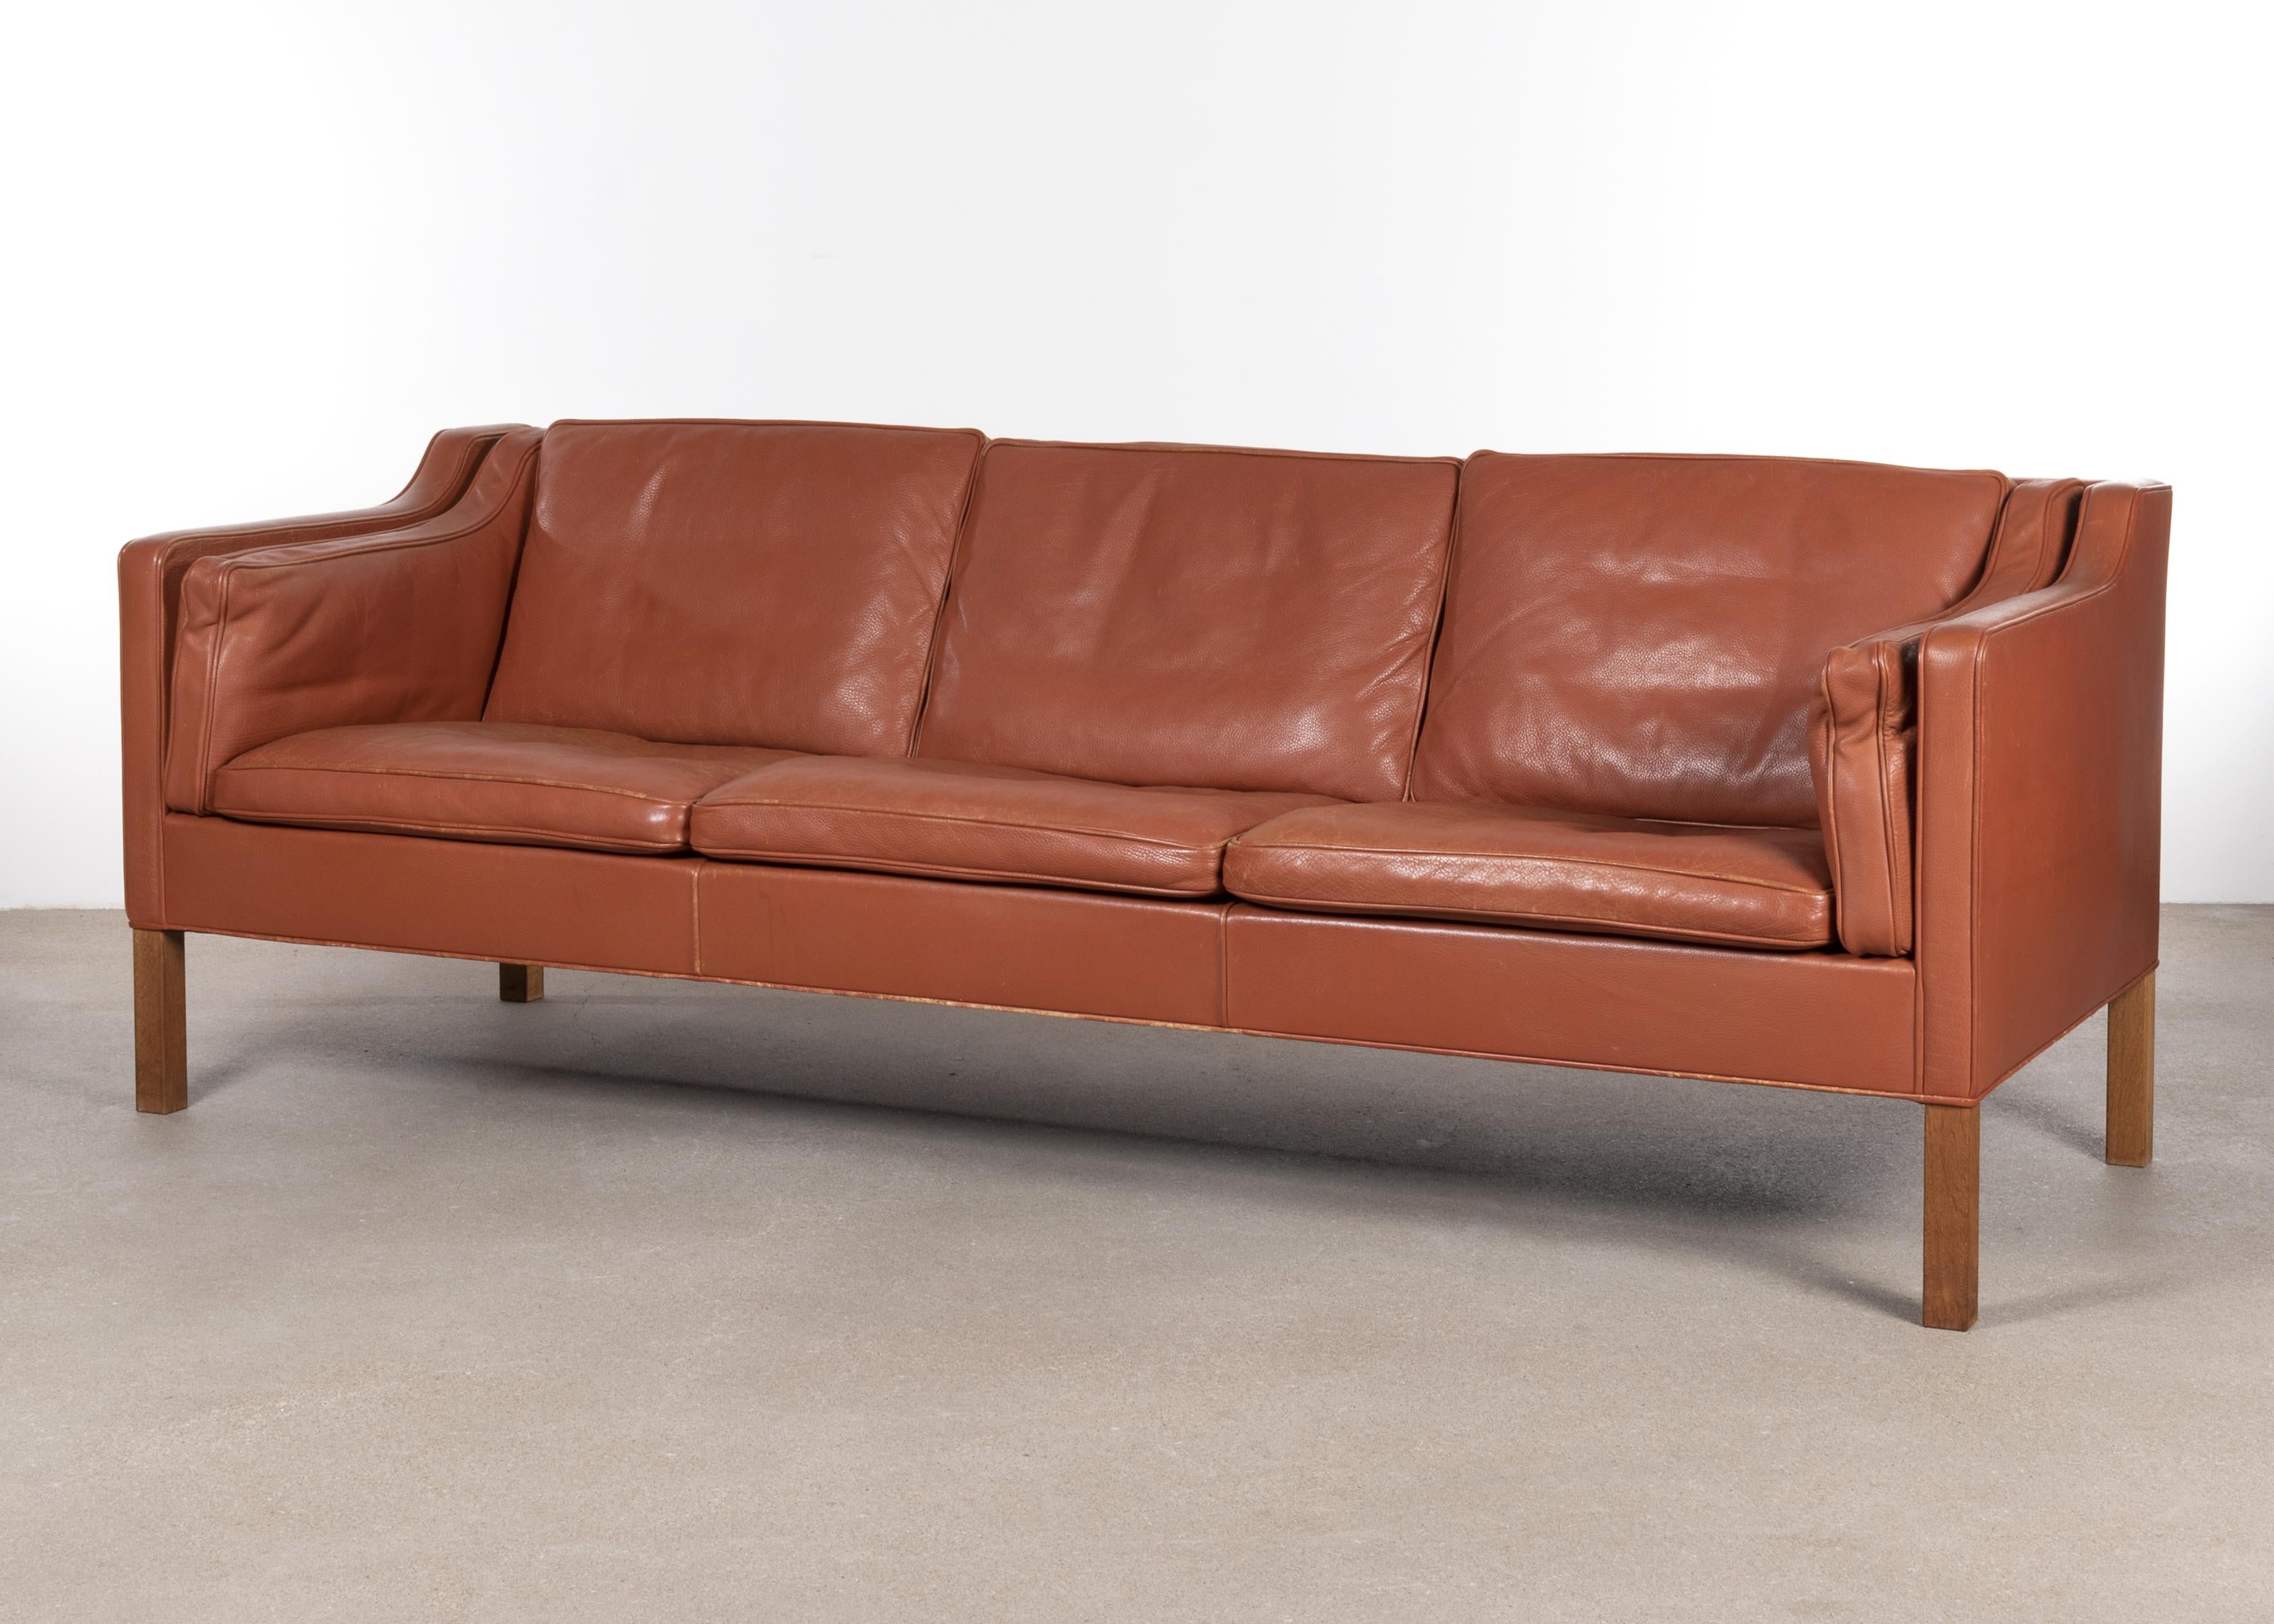 Comfortable three-seat sofa in redisch cognac leather model 2213 designed by Børge Mogensen for his own home. Produced by Fredericia Stolefabrik. Outstanding quality in materialization and construction which will last many decades. Slight traces of